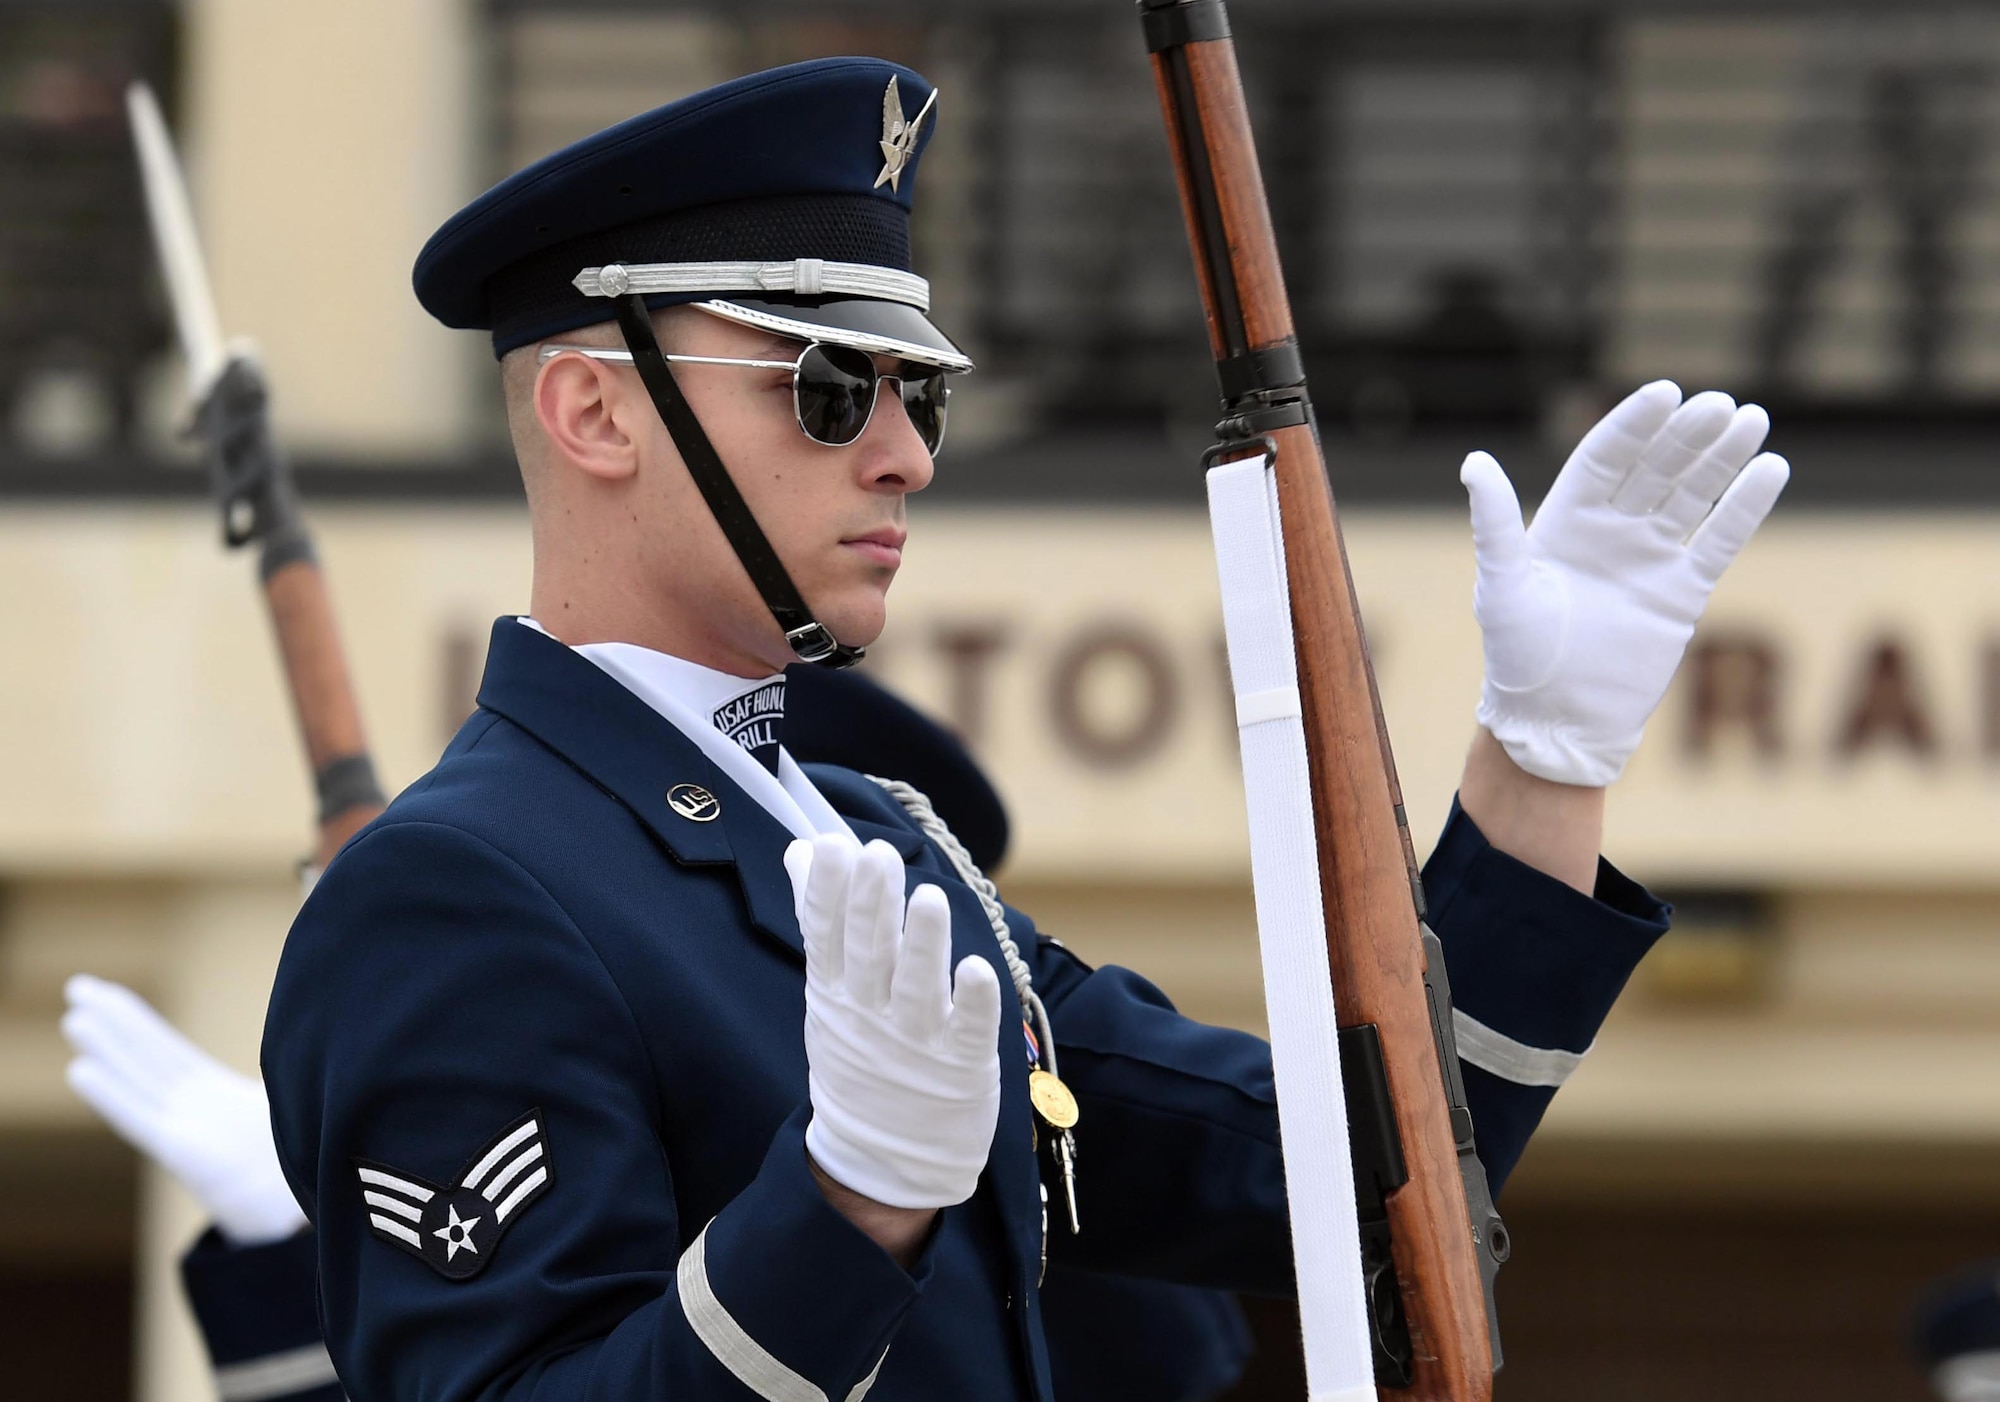 U.S. Air Force Senior Airman Nathan Leslie, U.S. Air Force Honor Guard Drill Team member, participates in the debut performance of the team's 2019 routine in front of Keesler leadership and 81st Training Group Airmen on the Levitow Training Support Facility drill pad at Keesler Air Force Base, Mississippi, Feb. 8, 2019. The team comes to Keesler every year for five weeks to develop a new routine that they will use throughout the year. (U.S. Air Force photo by Kemberly Groue)